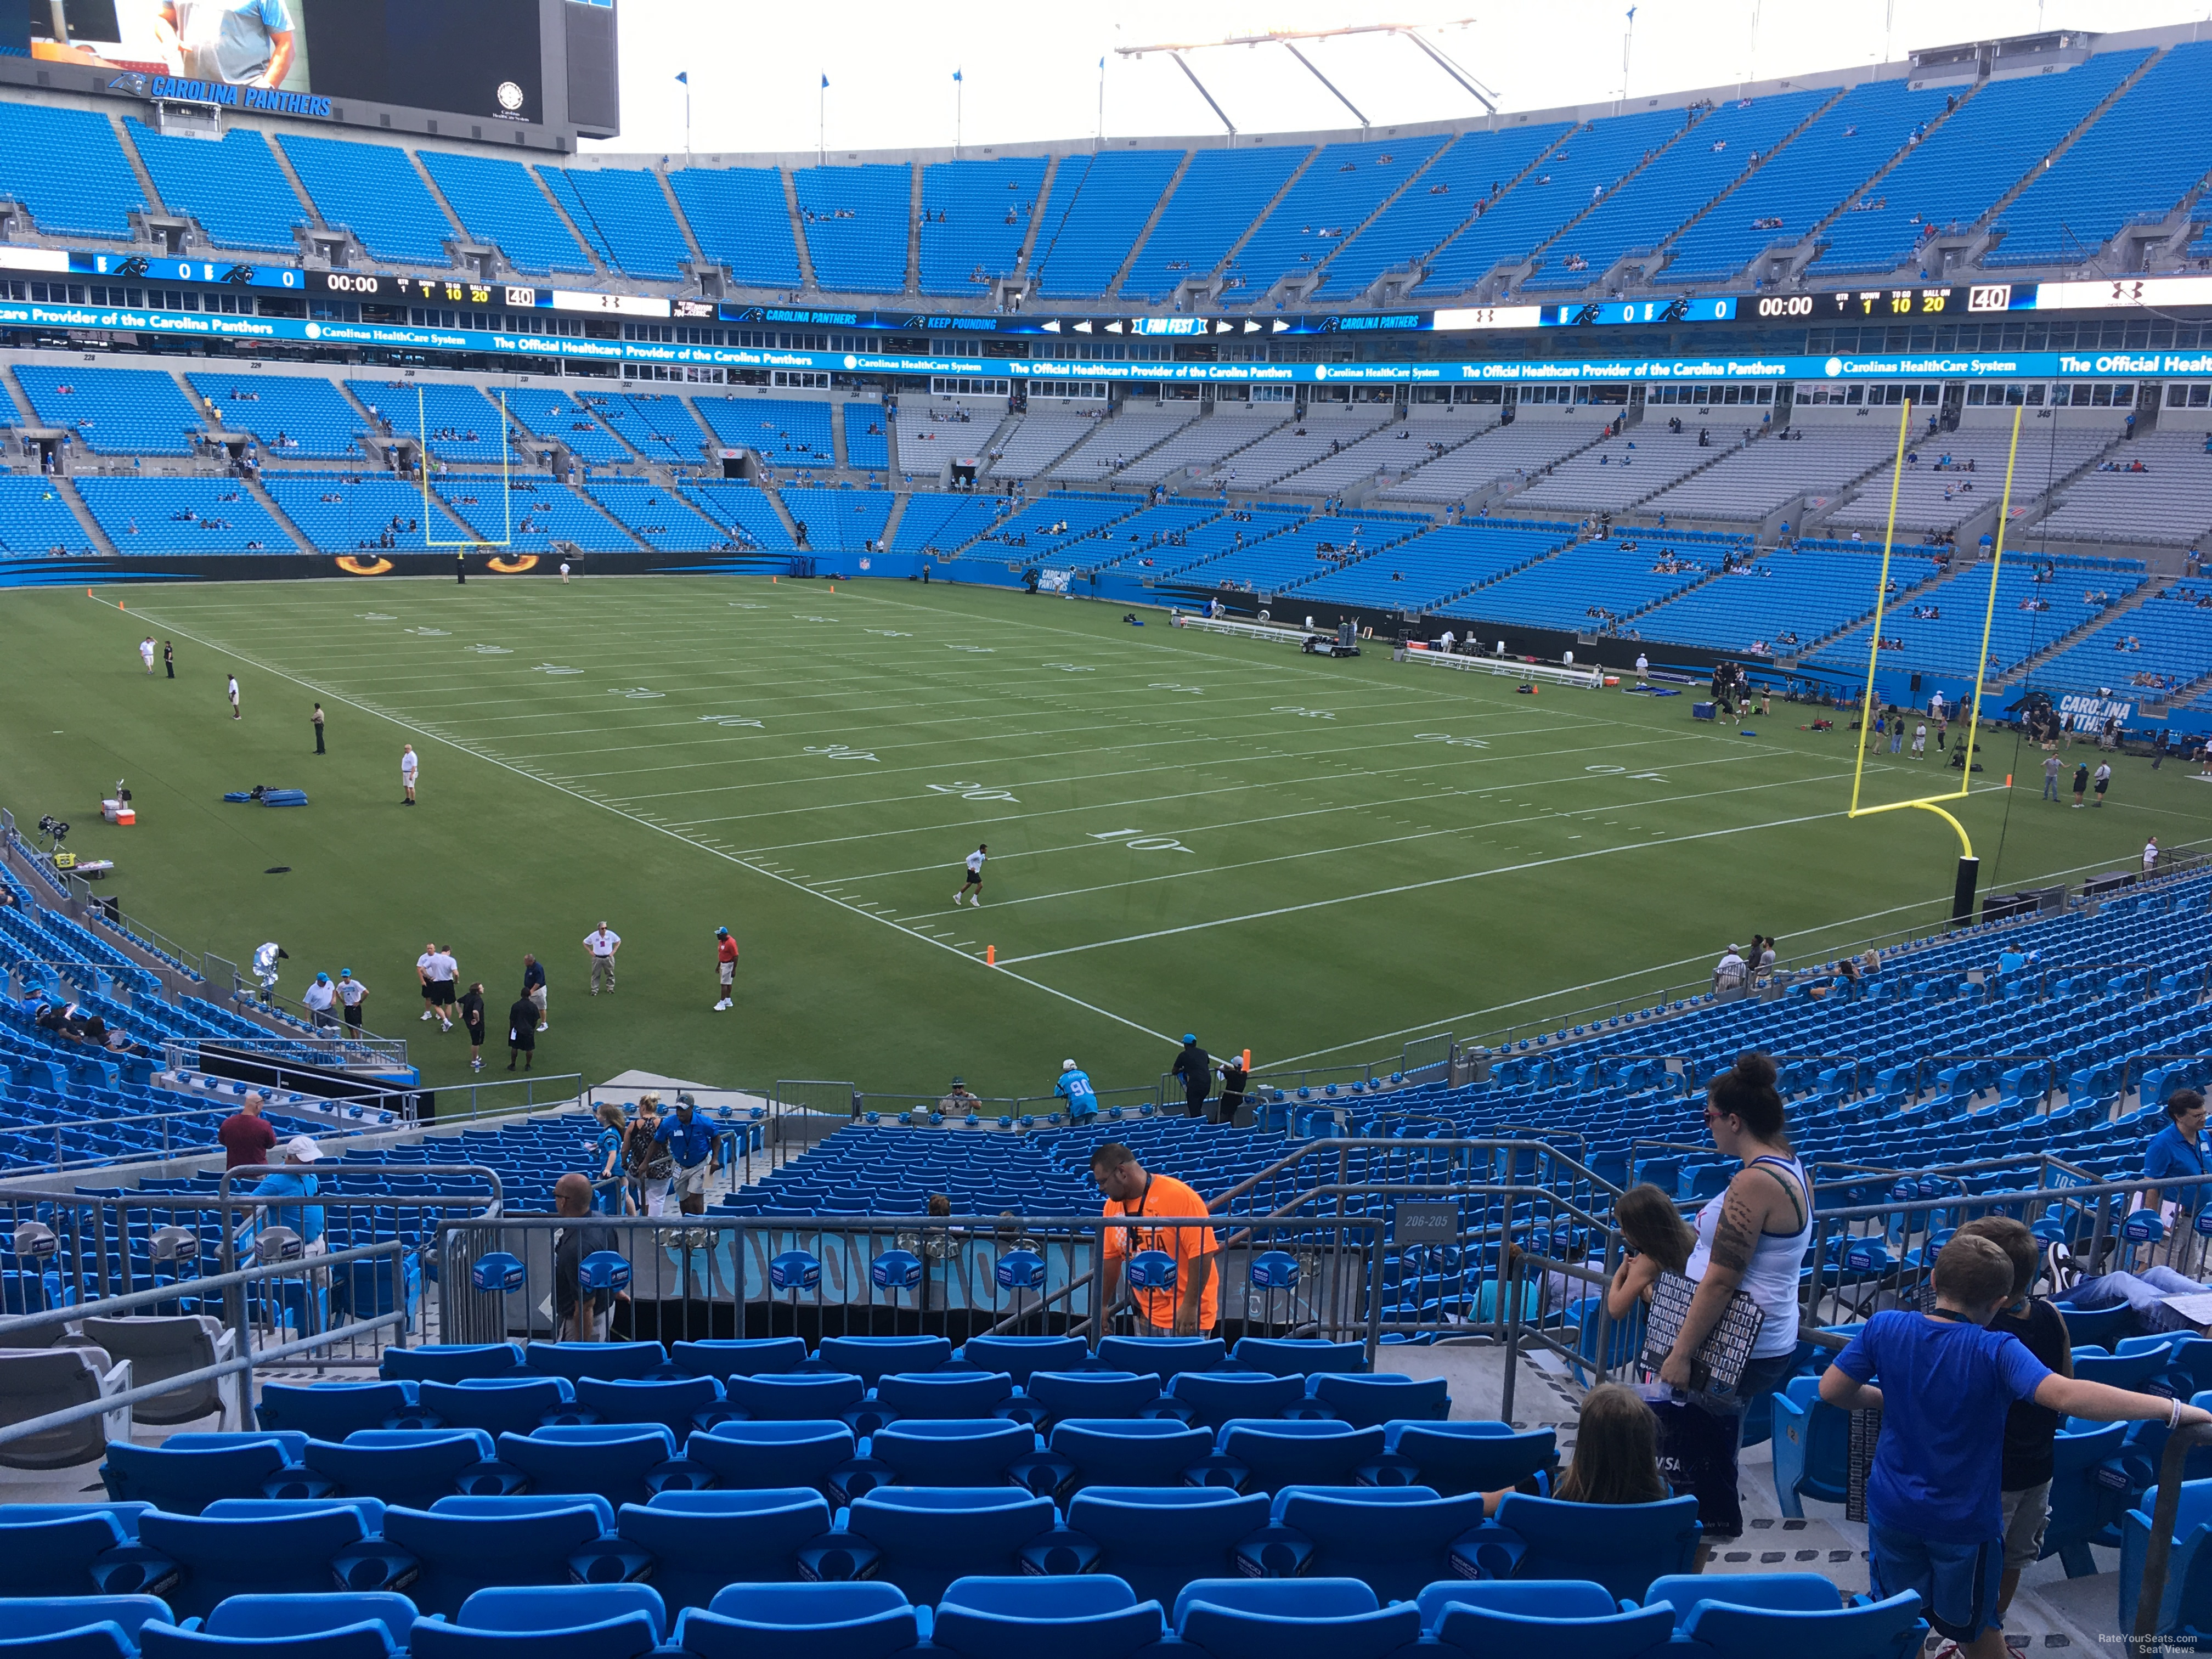 section 206, row 10 seat view  for football - bank of america stadium